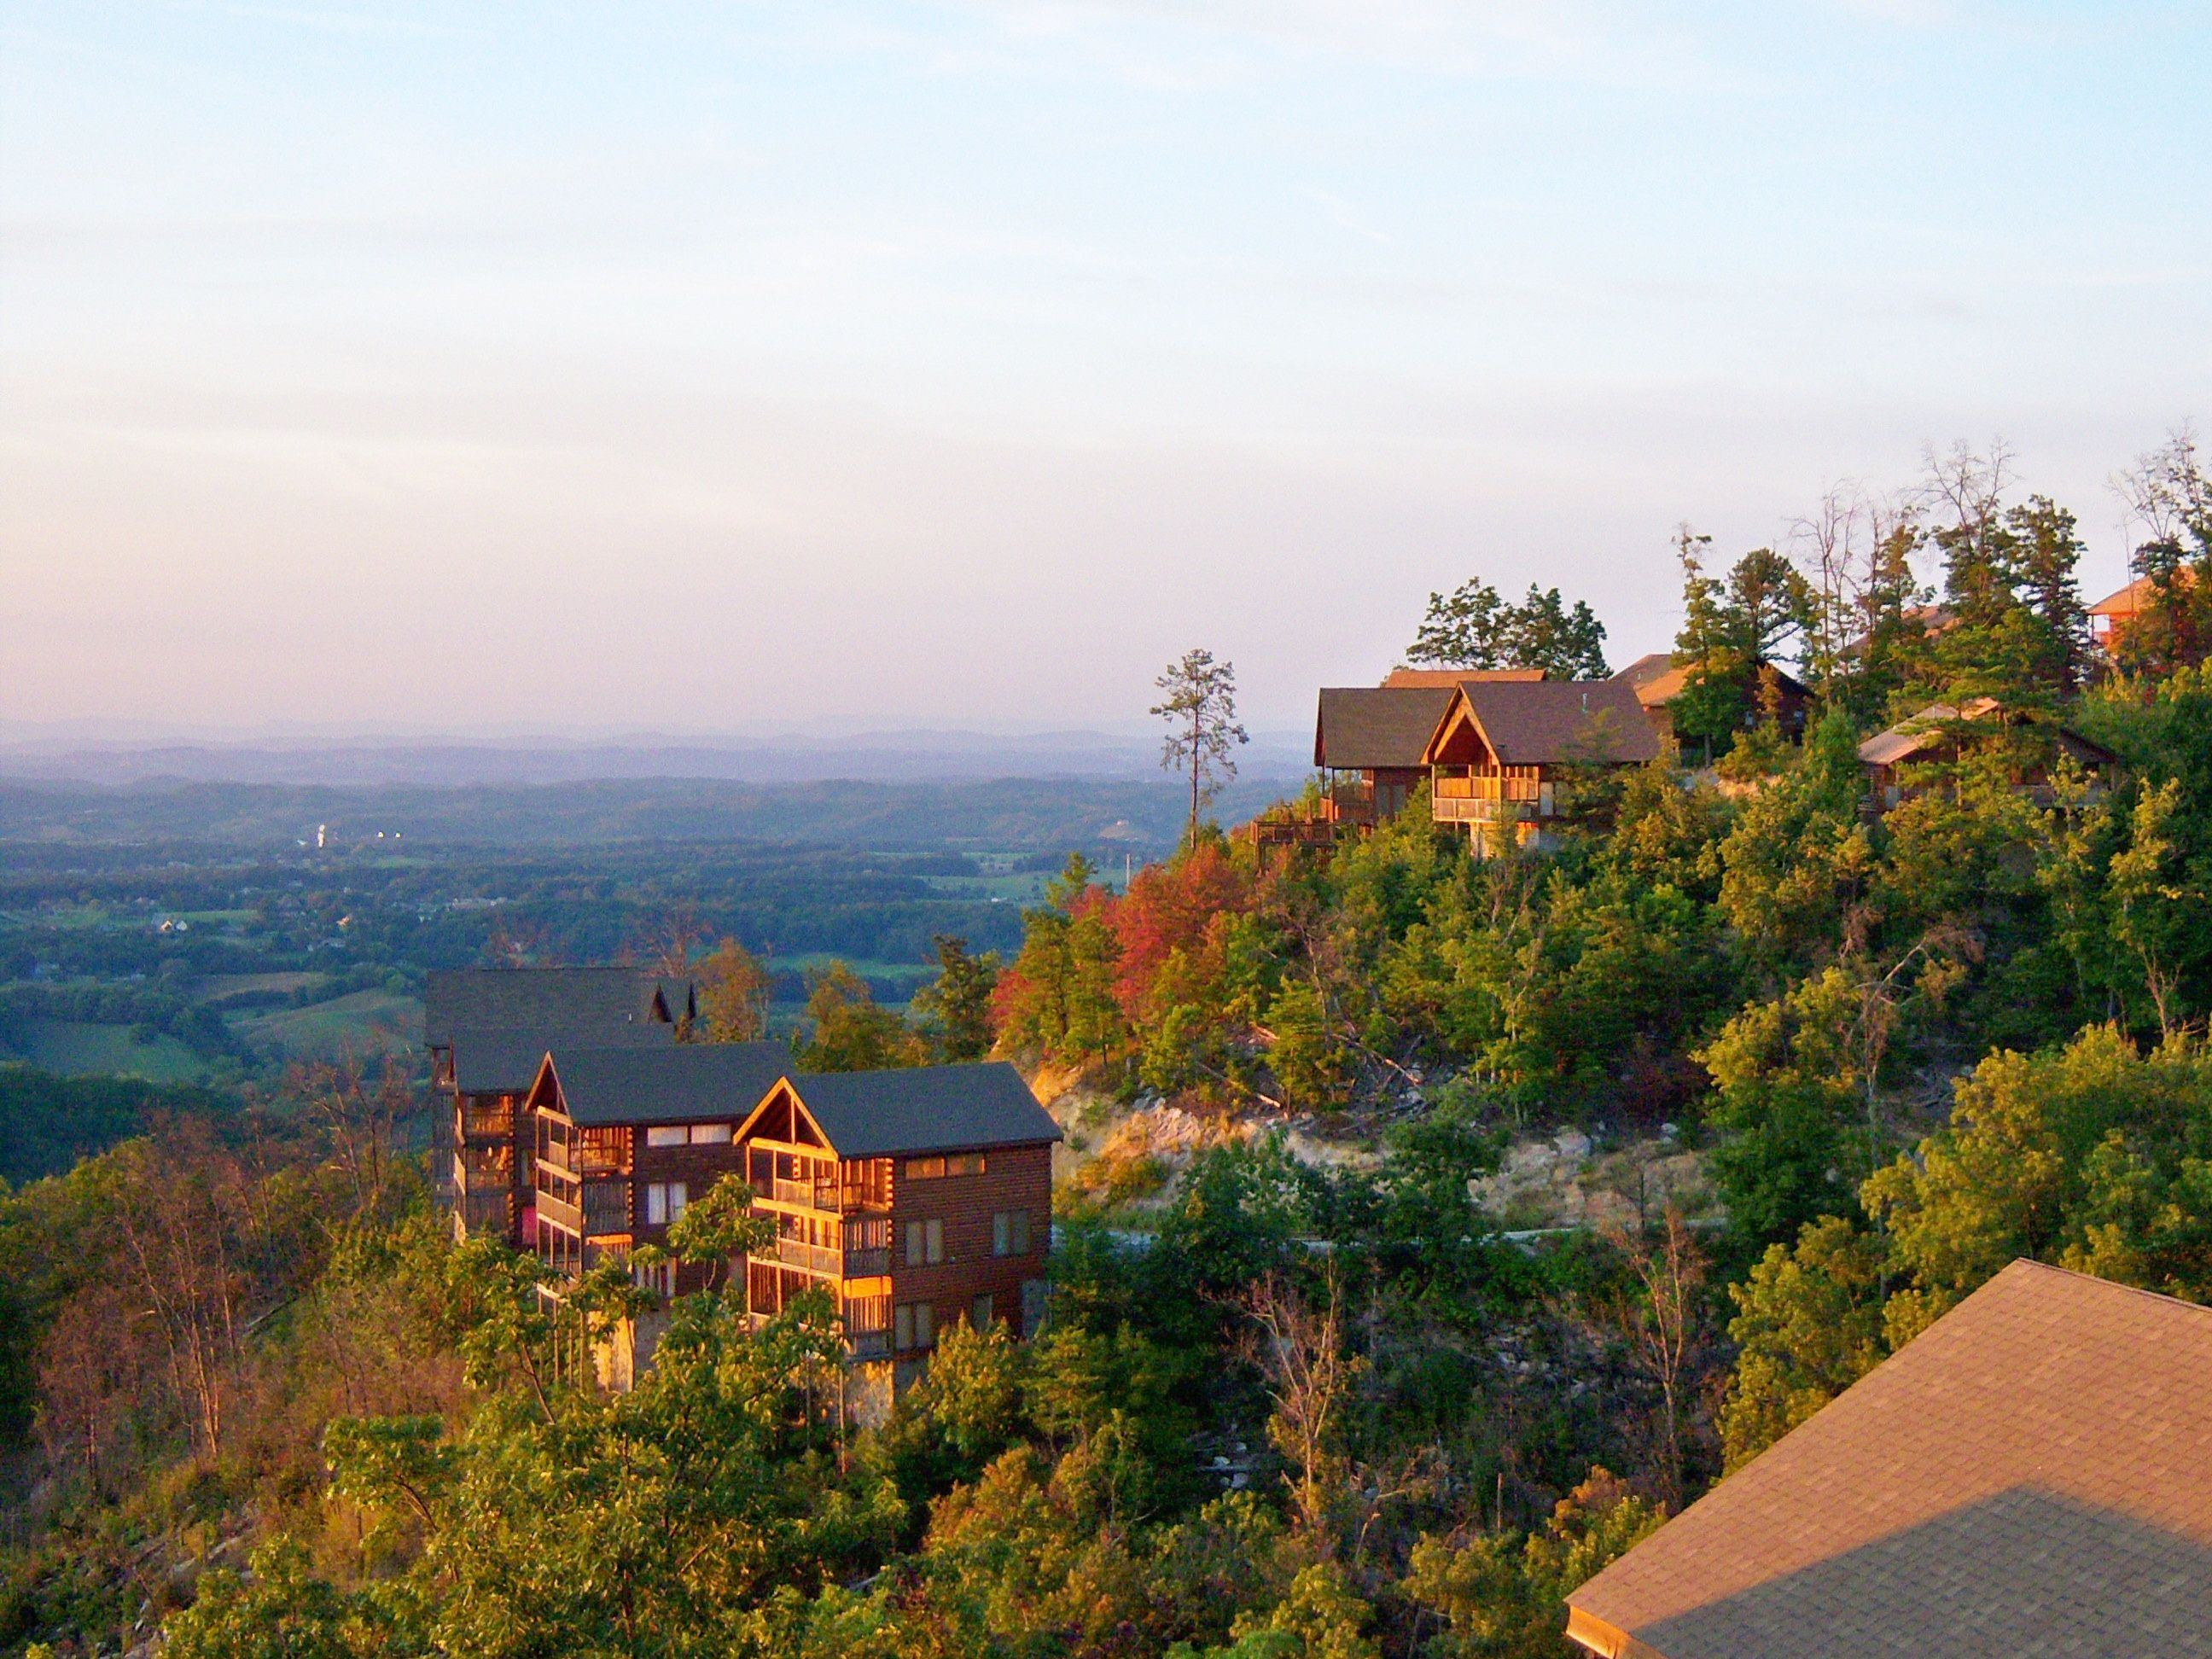 Luxurious mountain cabins perched on a hill  near the Great Smoky Mountains National Park